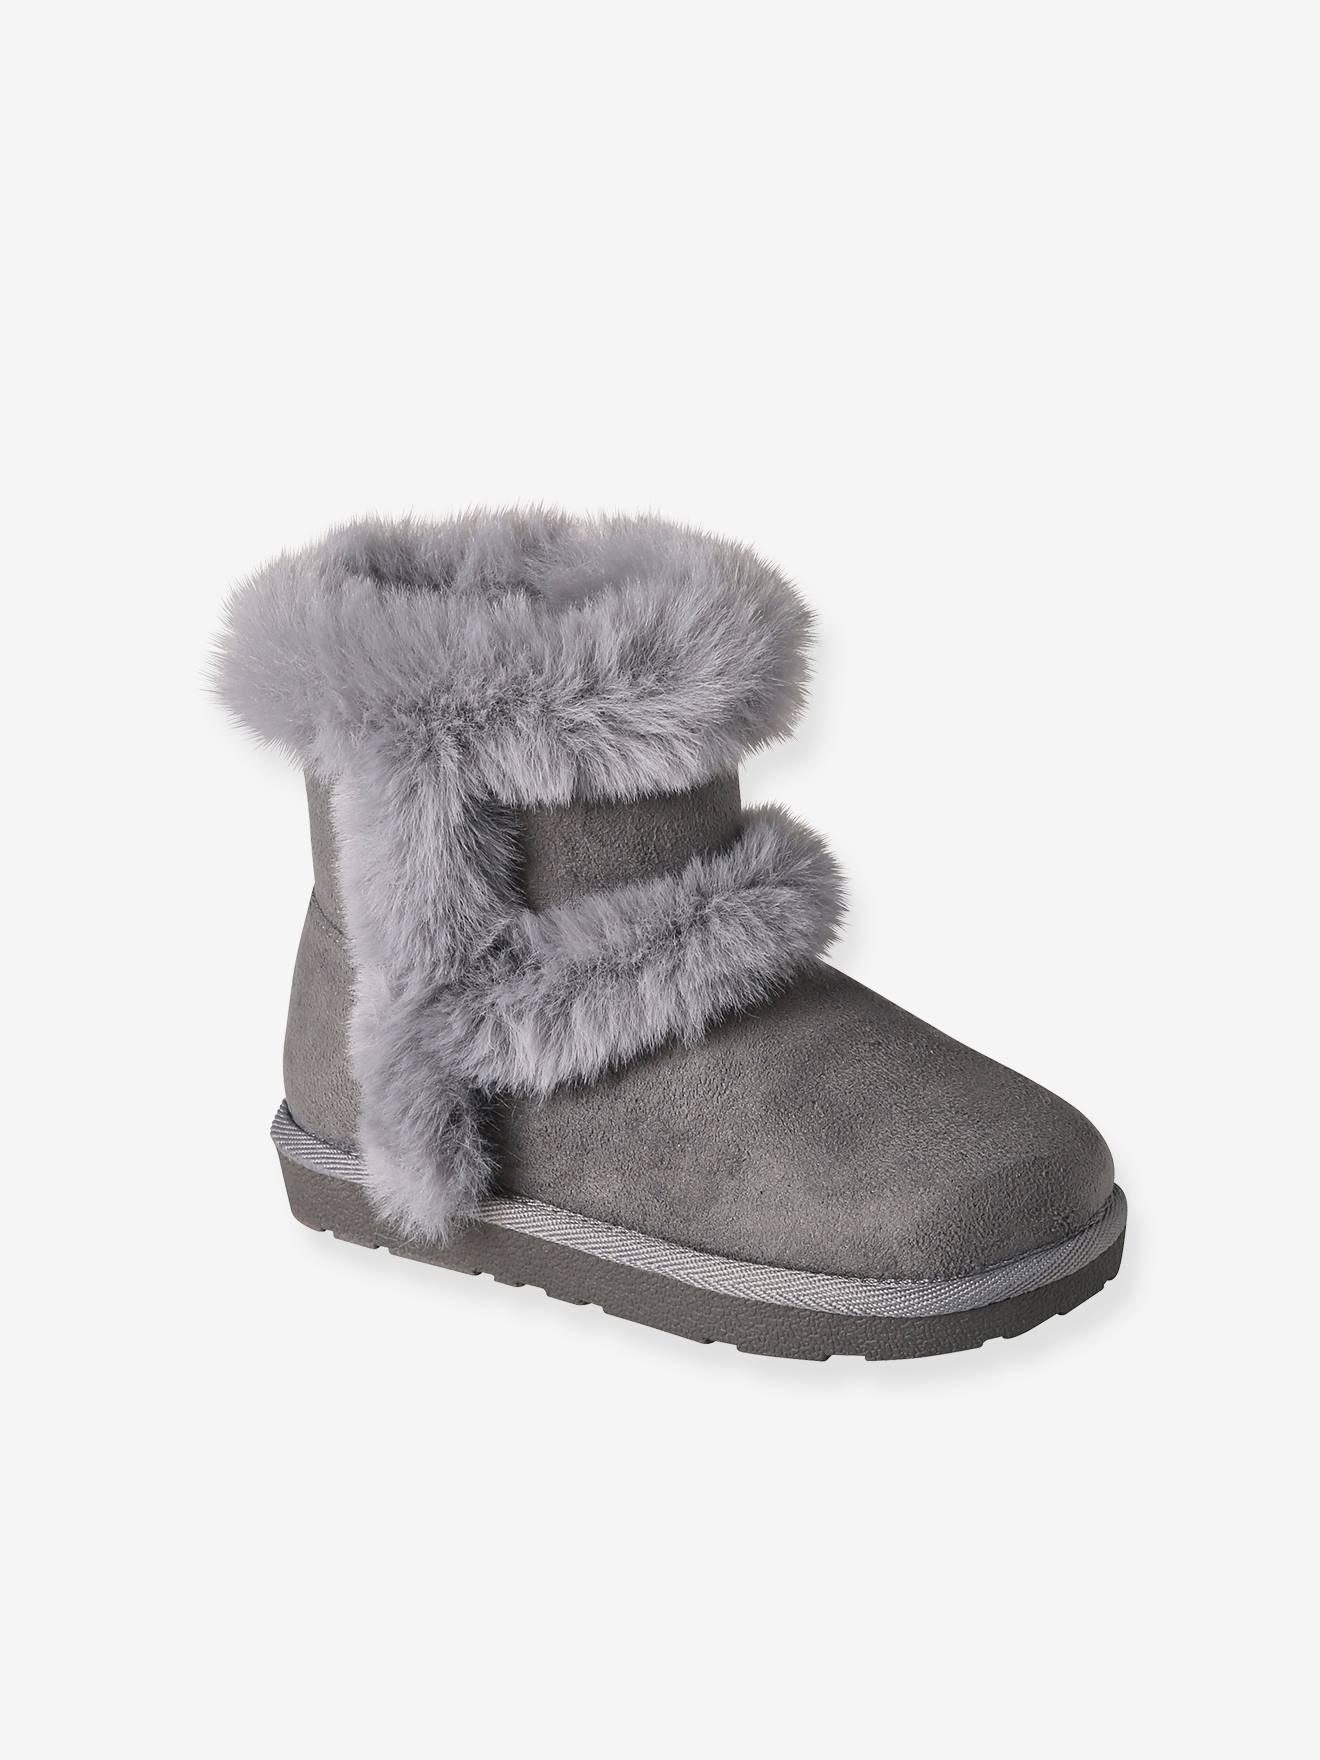 Water-Repellent Furry Boots with Zip for Girls - grey, Shoes | Stiefel